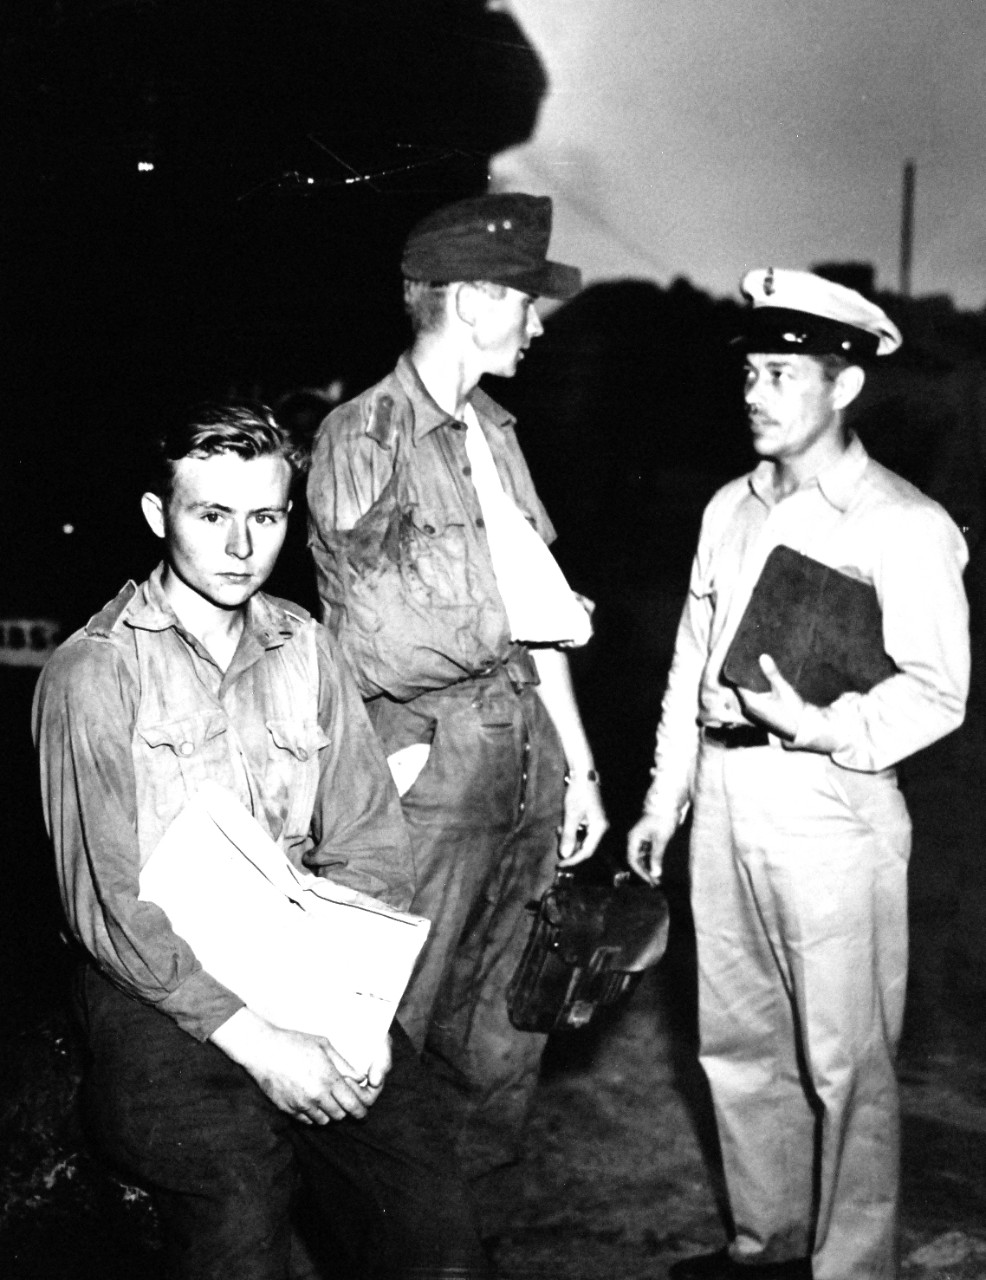 26-G-2046:  Operation Avalanche,  September 1943.  Coast Guardsman Talks It Over With Prisoners.  Somewhere in the Mediterranean, Coast Guardsman Earl Sauter talks to a wistful pair of young German prisoners onboard a Coast Guard manned transport en-route to a North African port.  The Germans were captured in the fighting around Salerno.  Coast Guardsman Sauter is a Chief Pharmacist’s Mate.     Official U.S. Coast Guard Photograph, now in the collections of the National Archives.   (2015/5/19). 